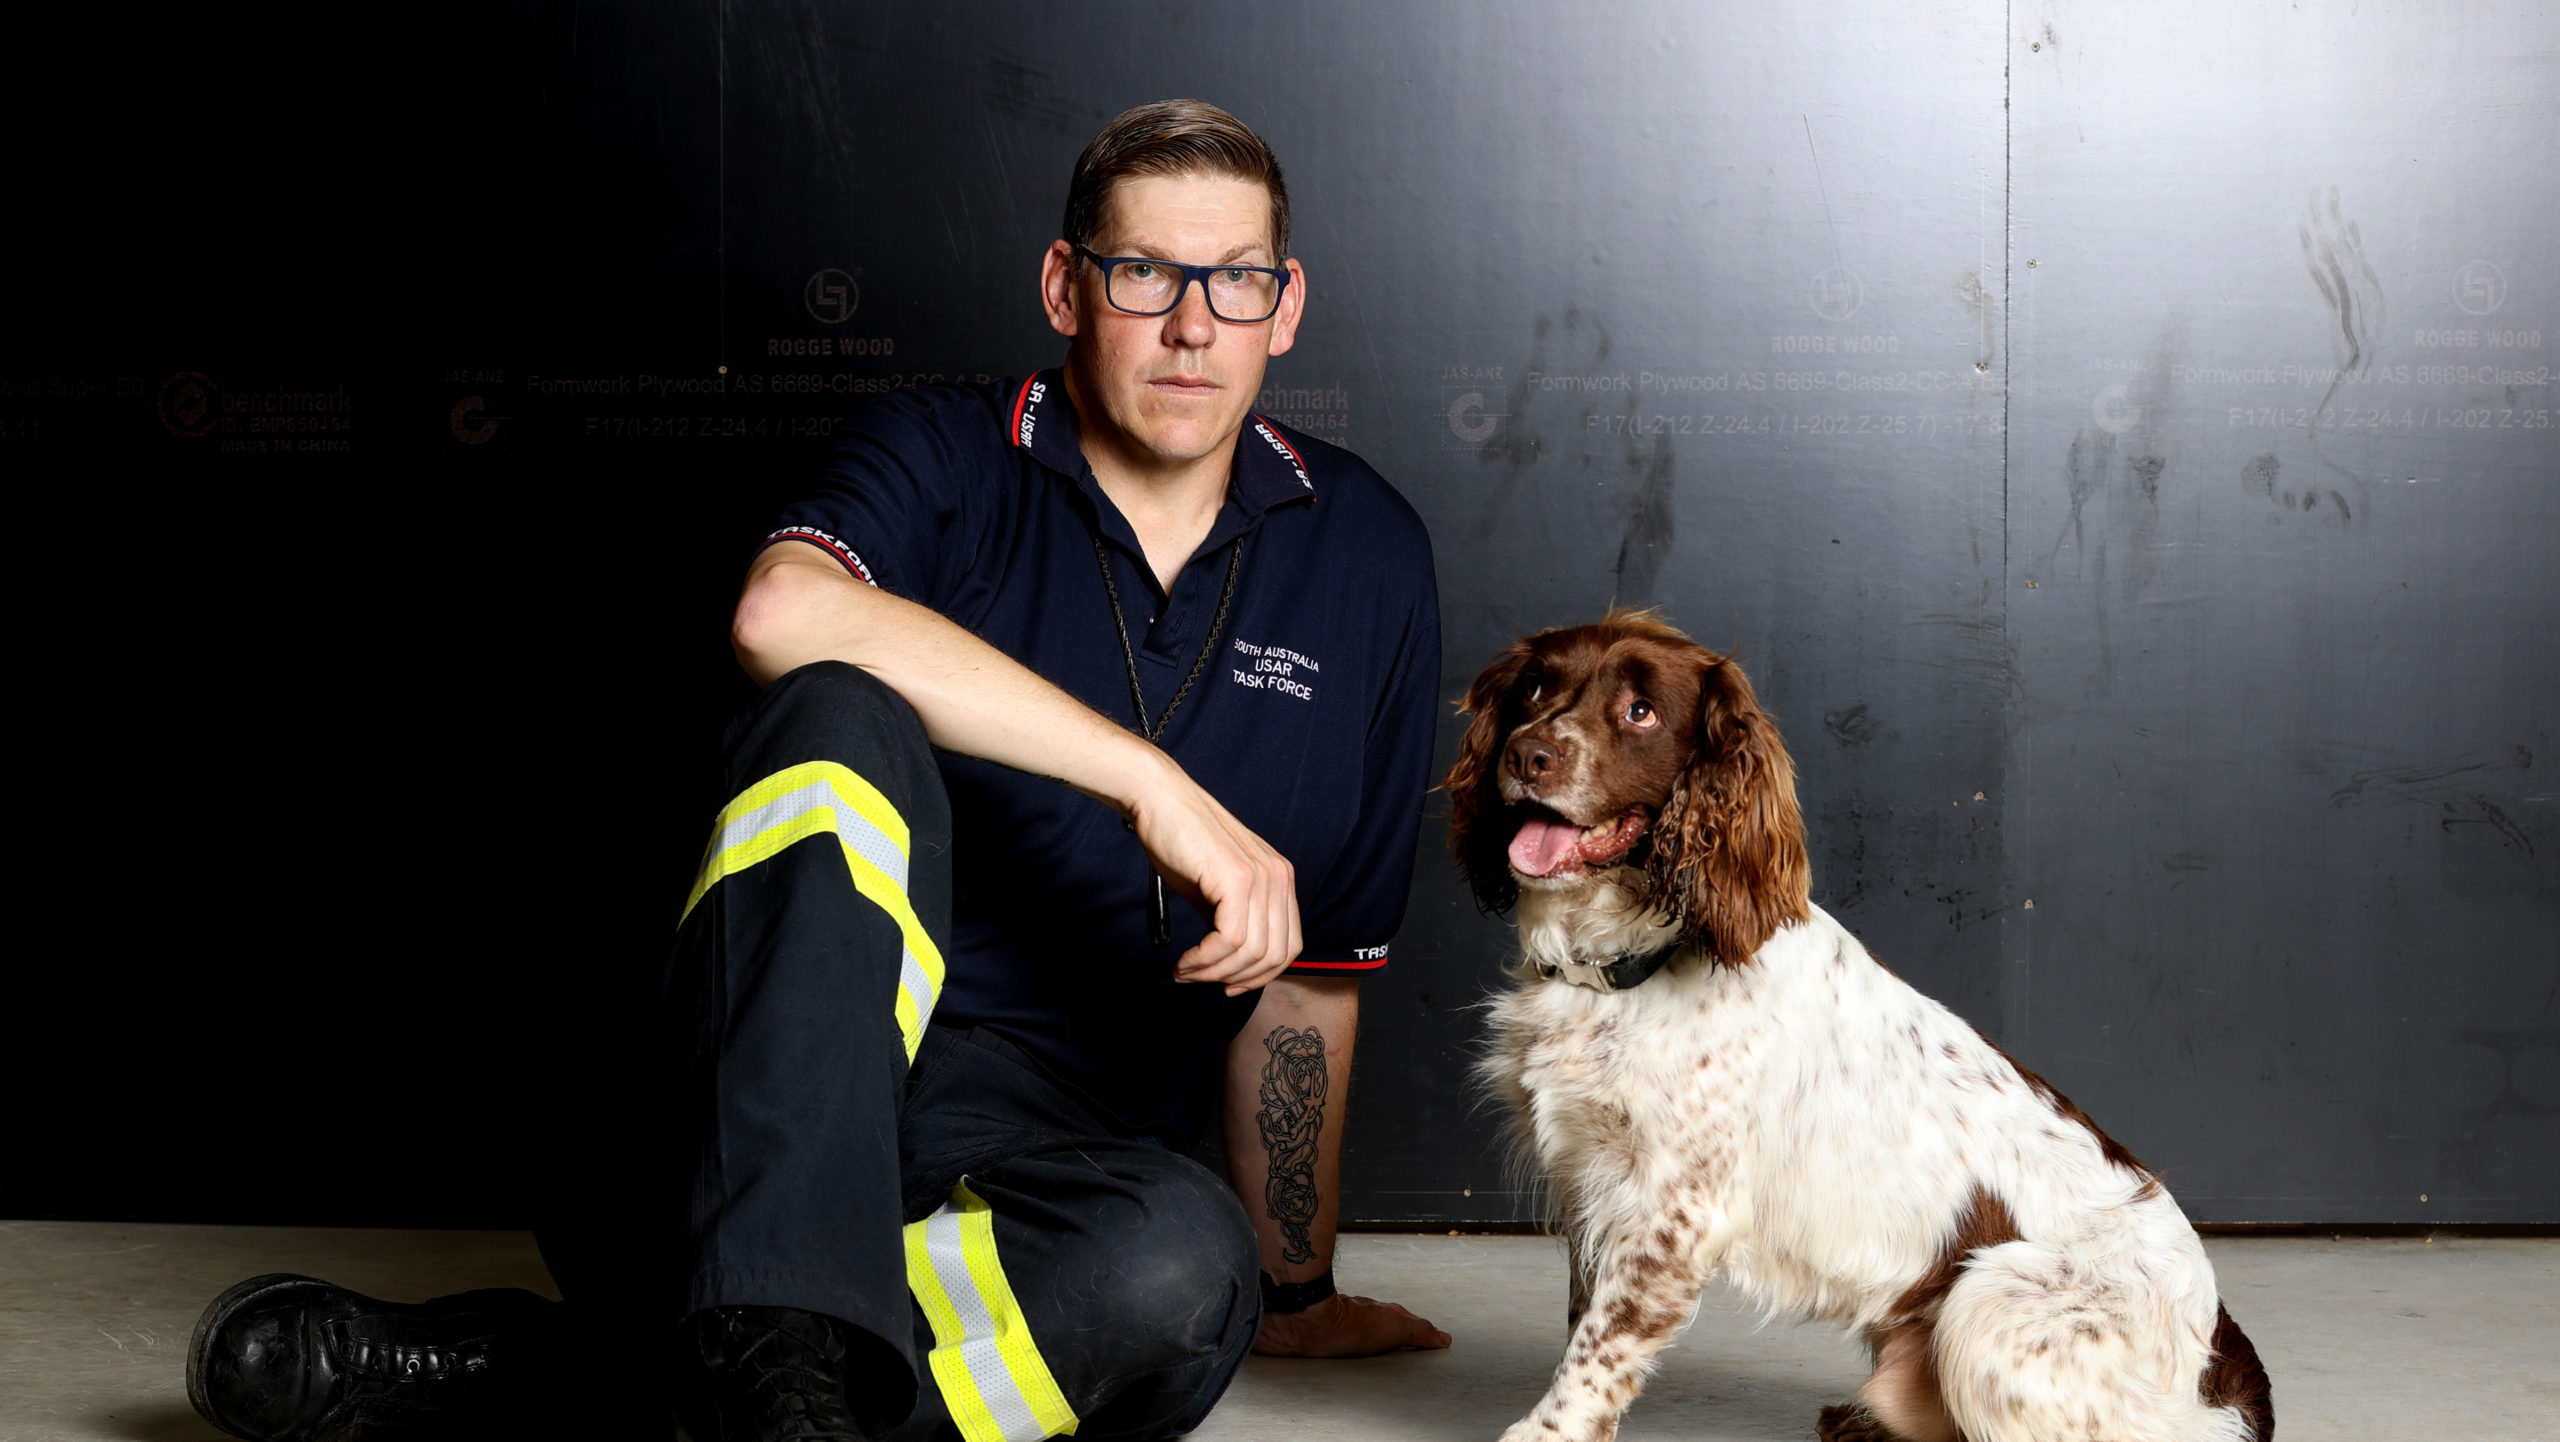 Dog handler and senior firefighter Alex Withers of the Metropolitan Fire Service SA and the SA Urban Search and Rescue Task Force with his English springer spaniel Floki. (Photo: Kelly Barnes, Getty Images)